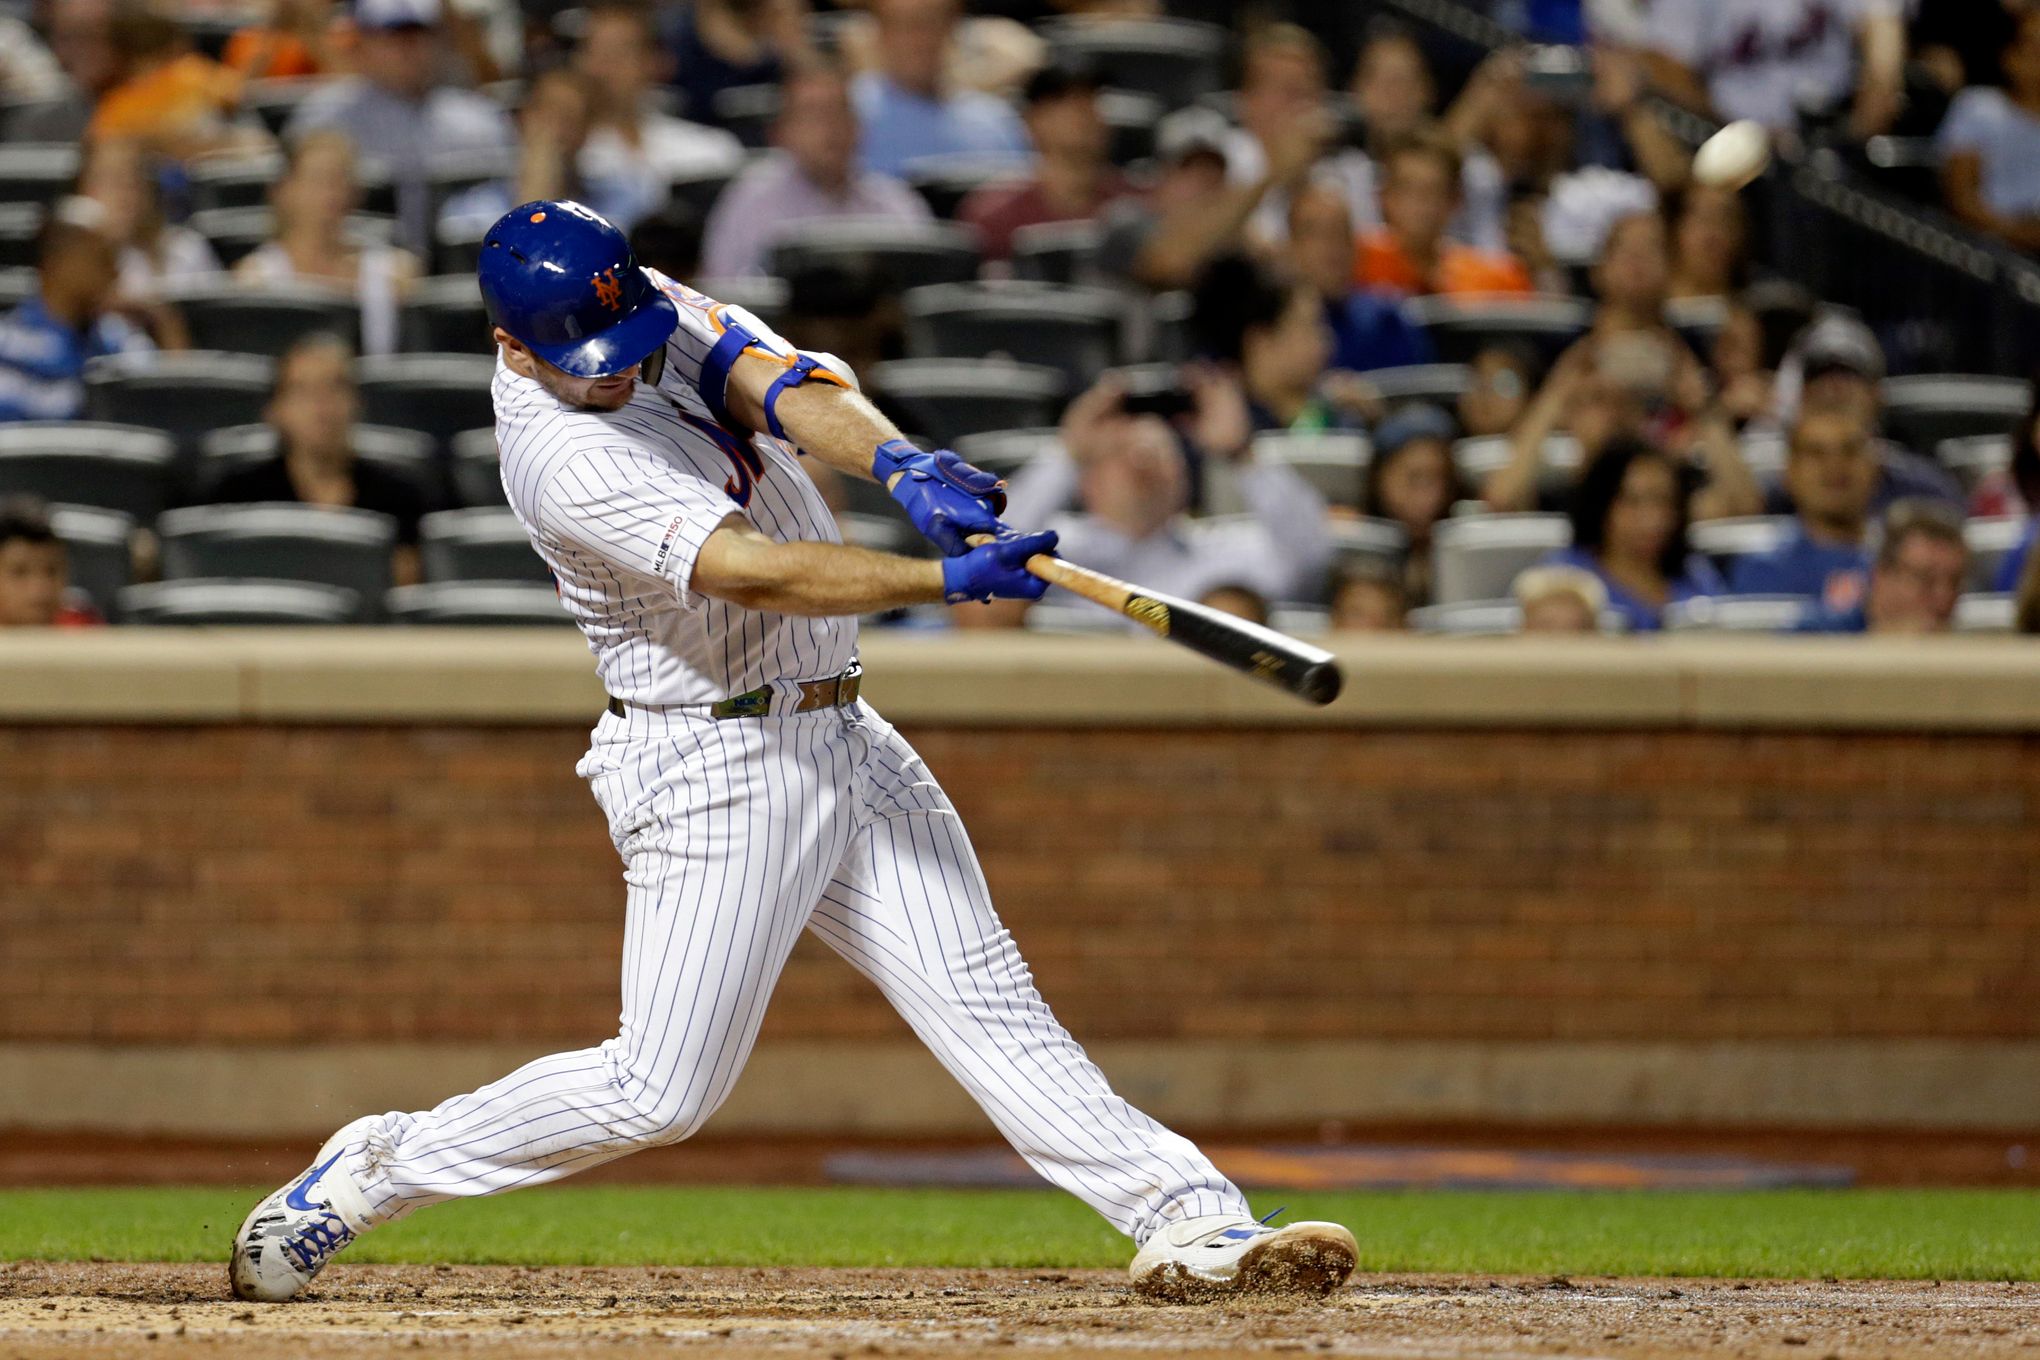 Pete Alonso of the New York Mets breaks MLB's rookie home run record